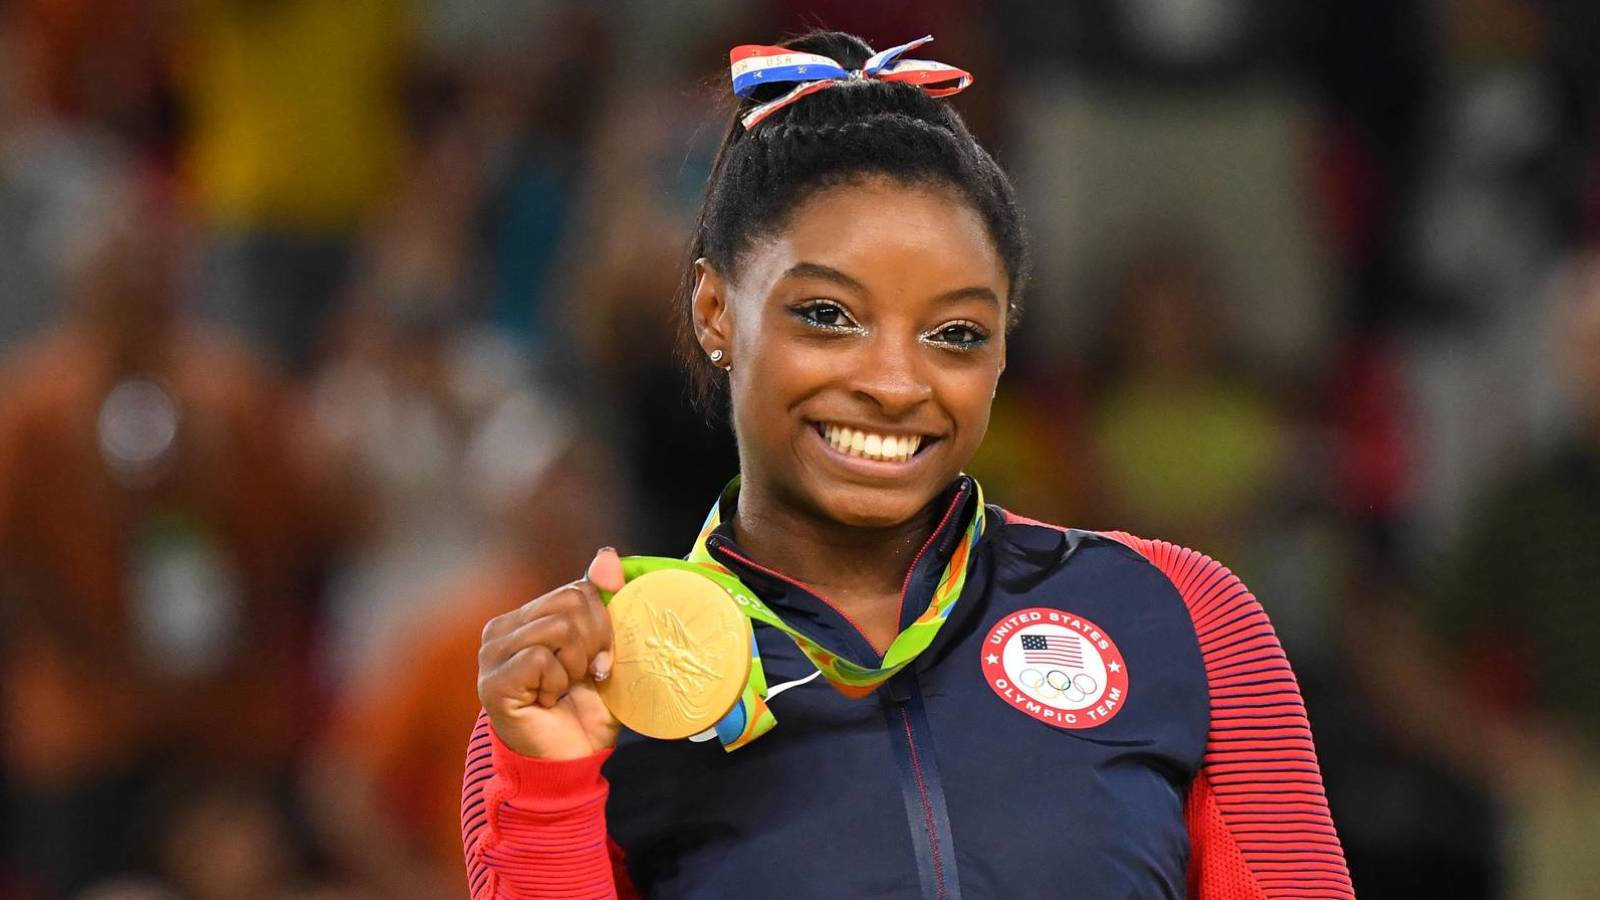 Simone Biles Holding A Gold Medal And Smiling